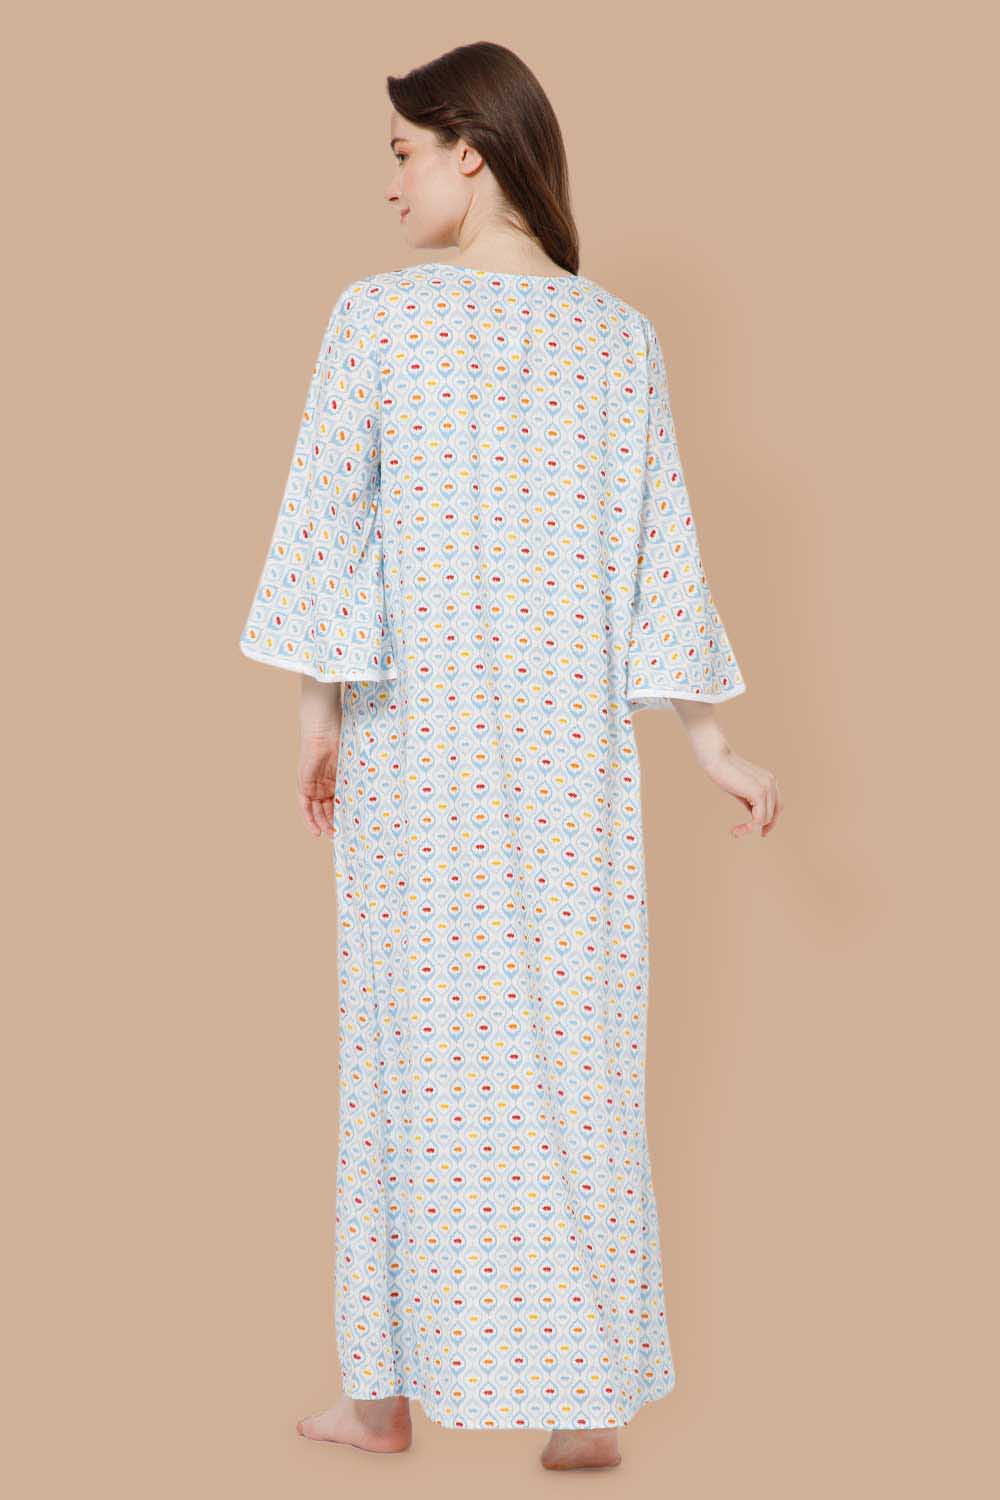 Naidu Hall V Neck Printed Nighty with Long Bell Sleeves - Sky Blue - NT40